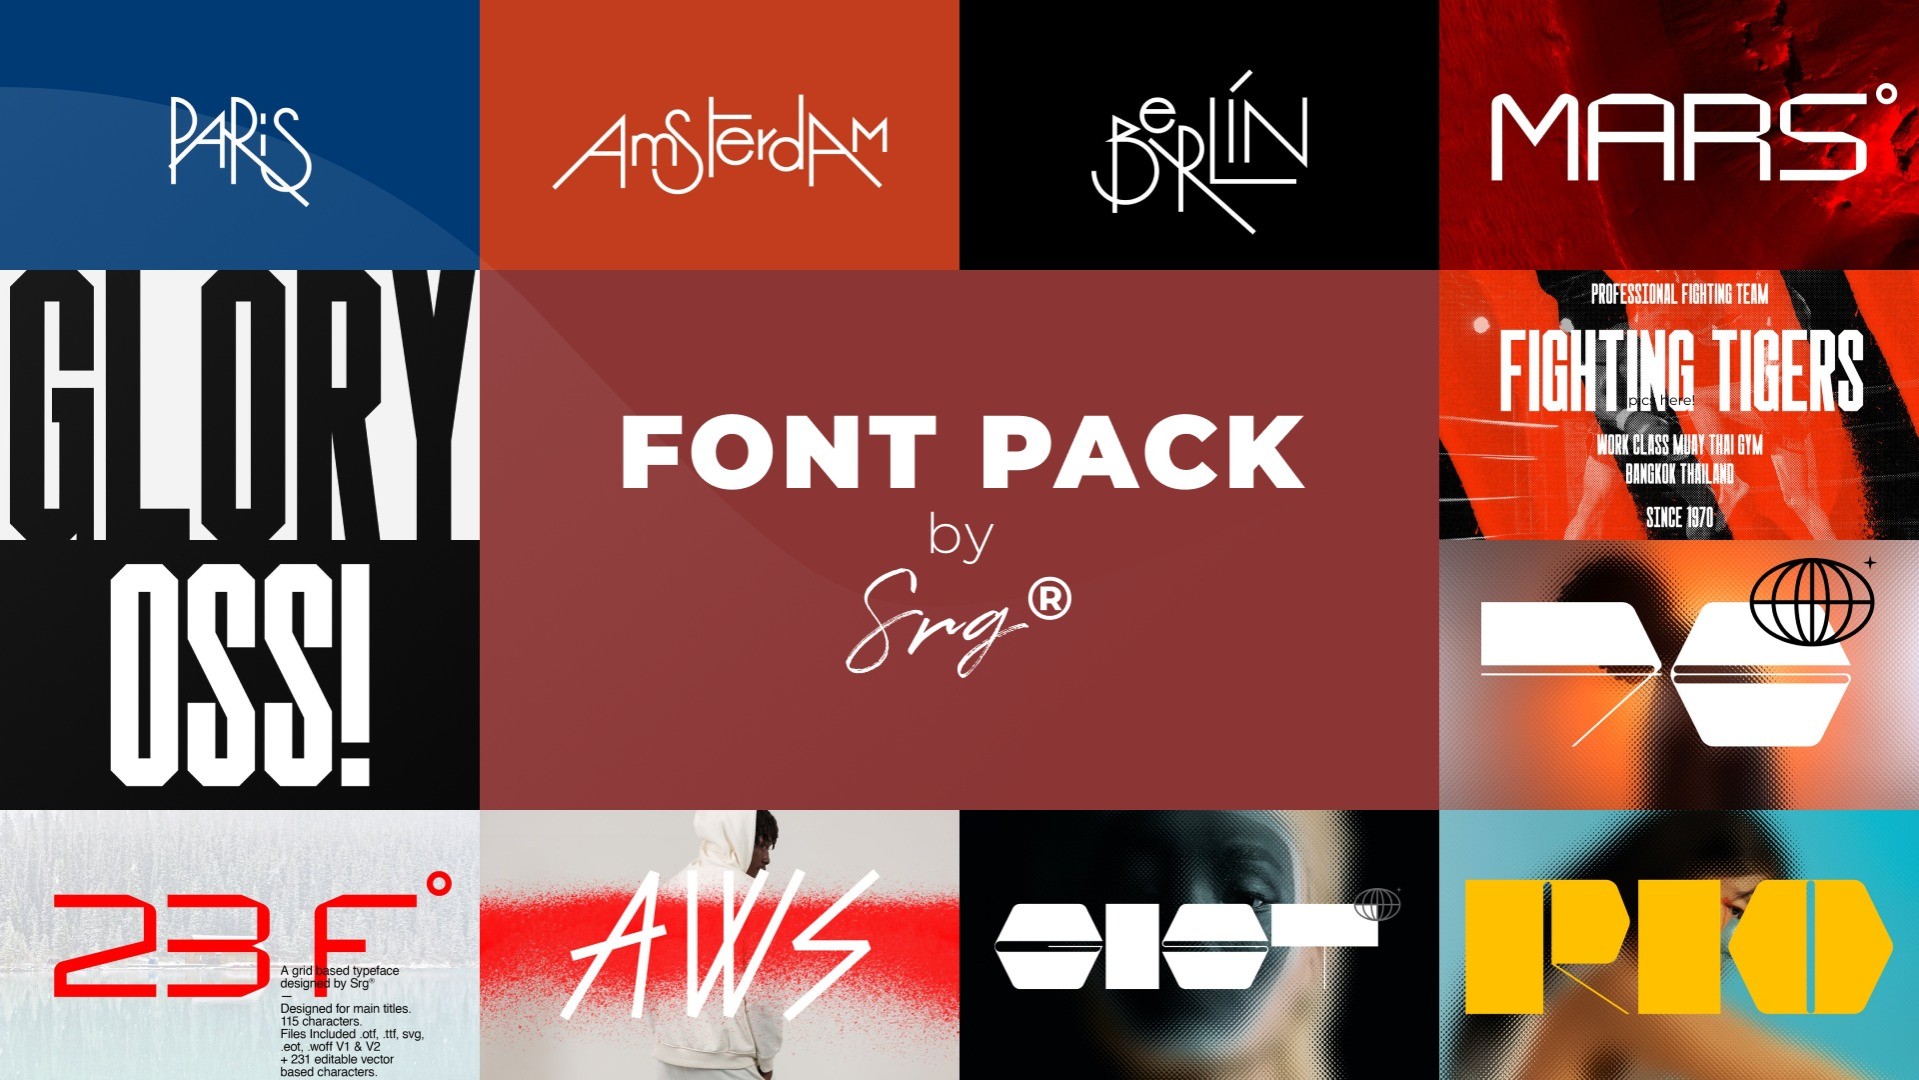 Font Pack by Srg®